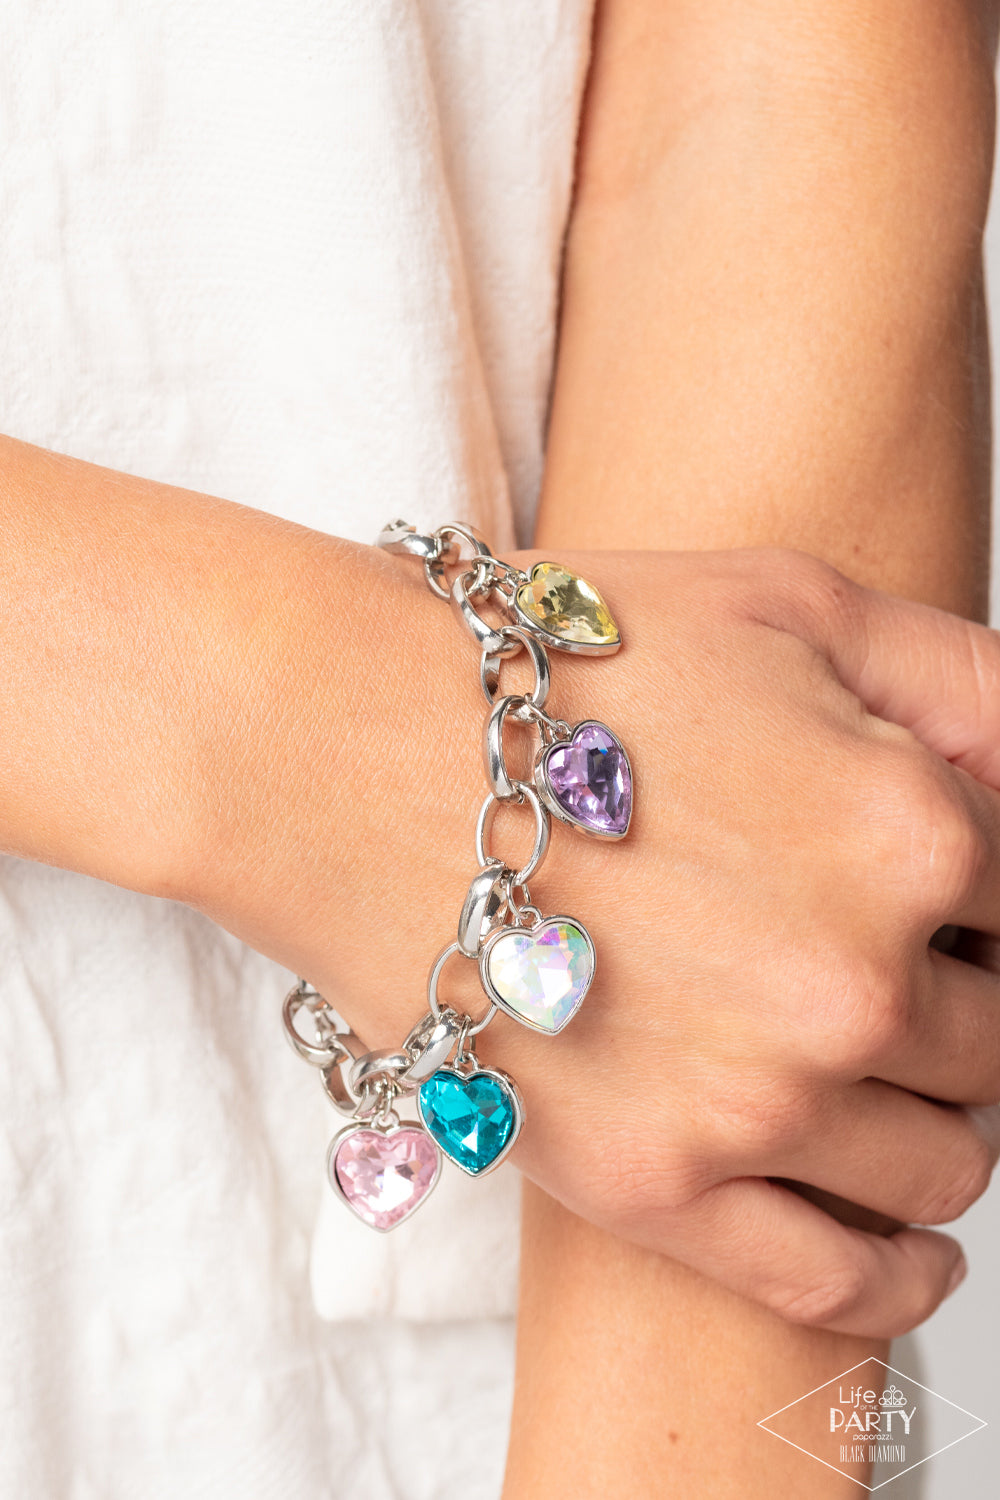 Candy Heart Charmer Multi Bracelet - Paparazzi Accessories  Multicolored heart-shaped gems are encased in sleek silver frames that swing from an oversized silver chain, creating a sparkly fringe around the wrist. Features an adjustable clasp closure. Due to its prismatic palette, color may vary.  Sold as one individual bracelet.  P9RE-MTXX-073XX